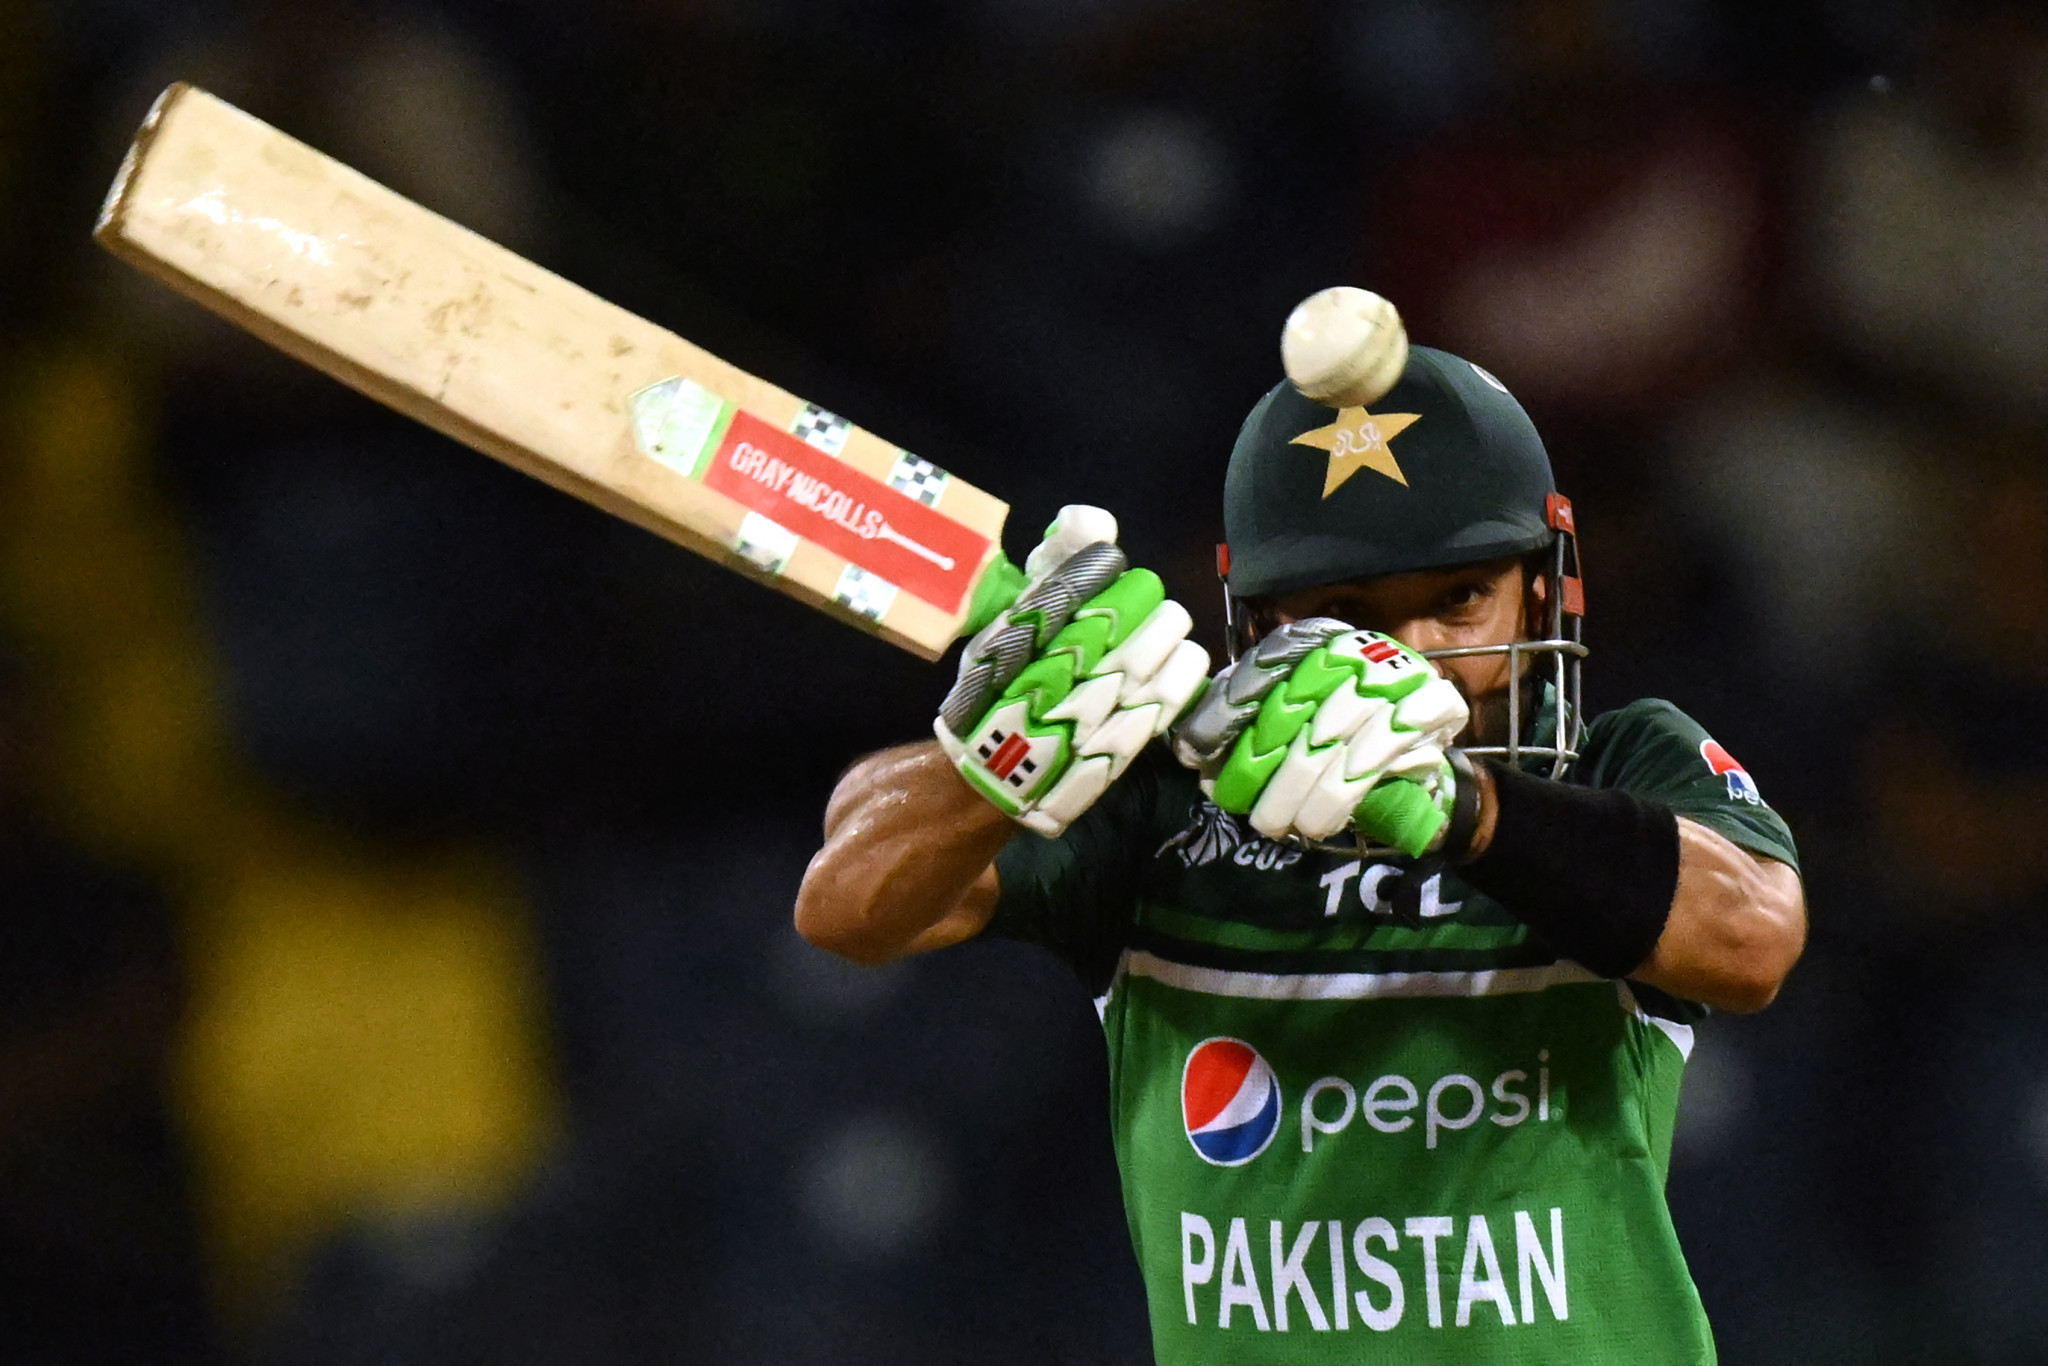 Rizwan defies cramp to hit unbeaten 100 as Pakistan complete highest ever Cricket World Cup run chase